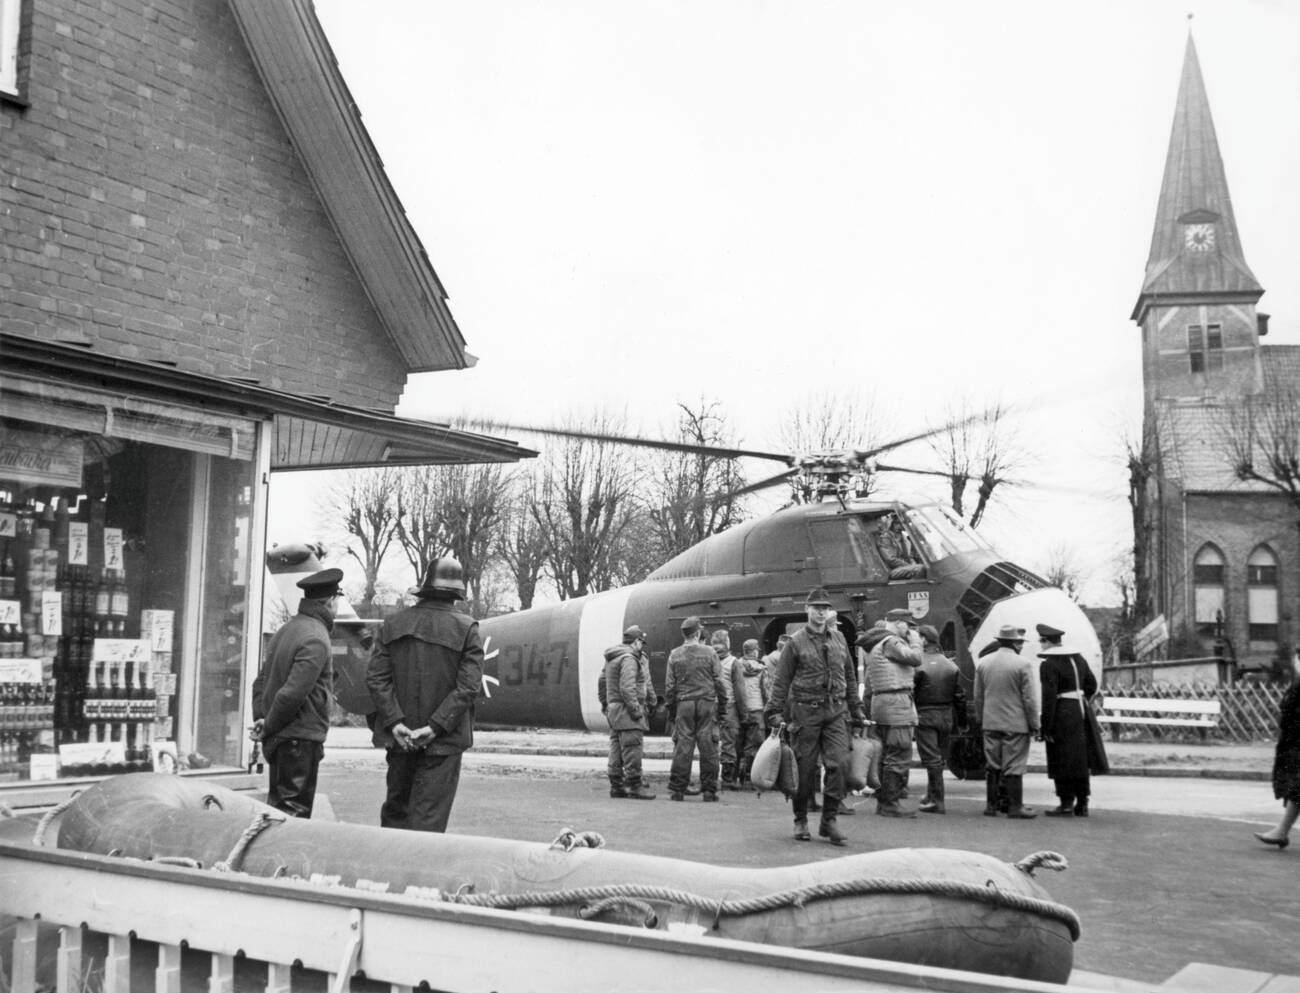 Unloading a helicopter during the North Sea Flood of 1962 in Hamburg, West Germany